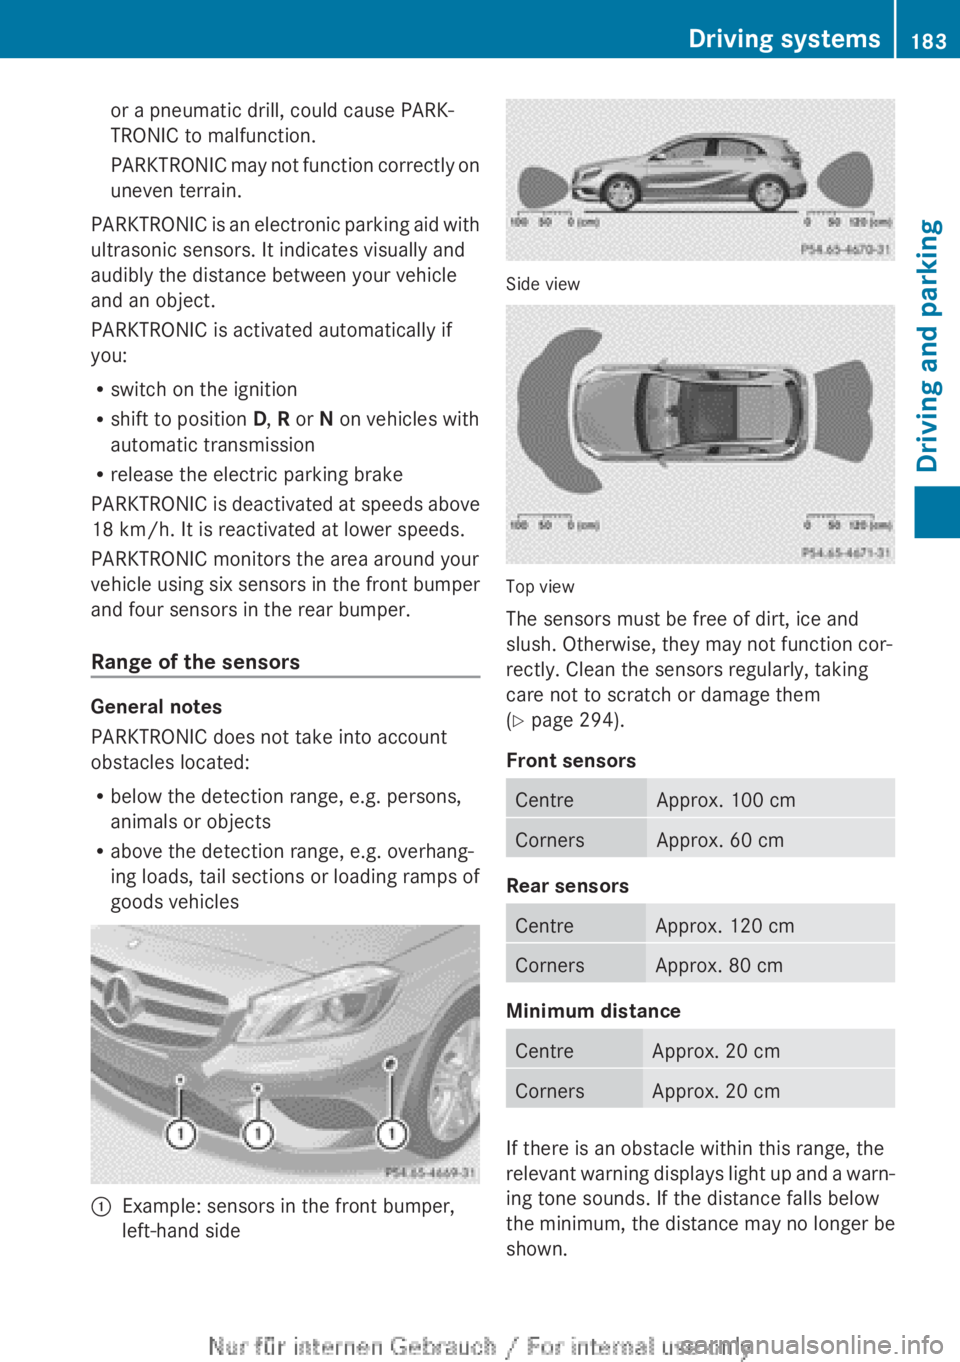 MERCEDES-BENZ A CLASS 2012  Owners Manual or a pneumatic drill, could cause PARK-
TRONIC to malfunction.
PARKTRONIC 
may not function correctly on
uneven terrain.
PARKTRONIC is an electronic parking aid with
ultrasonic sensors. It indicates v